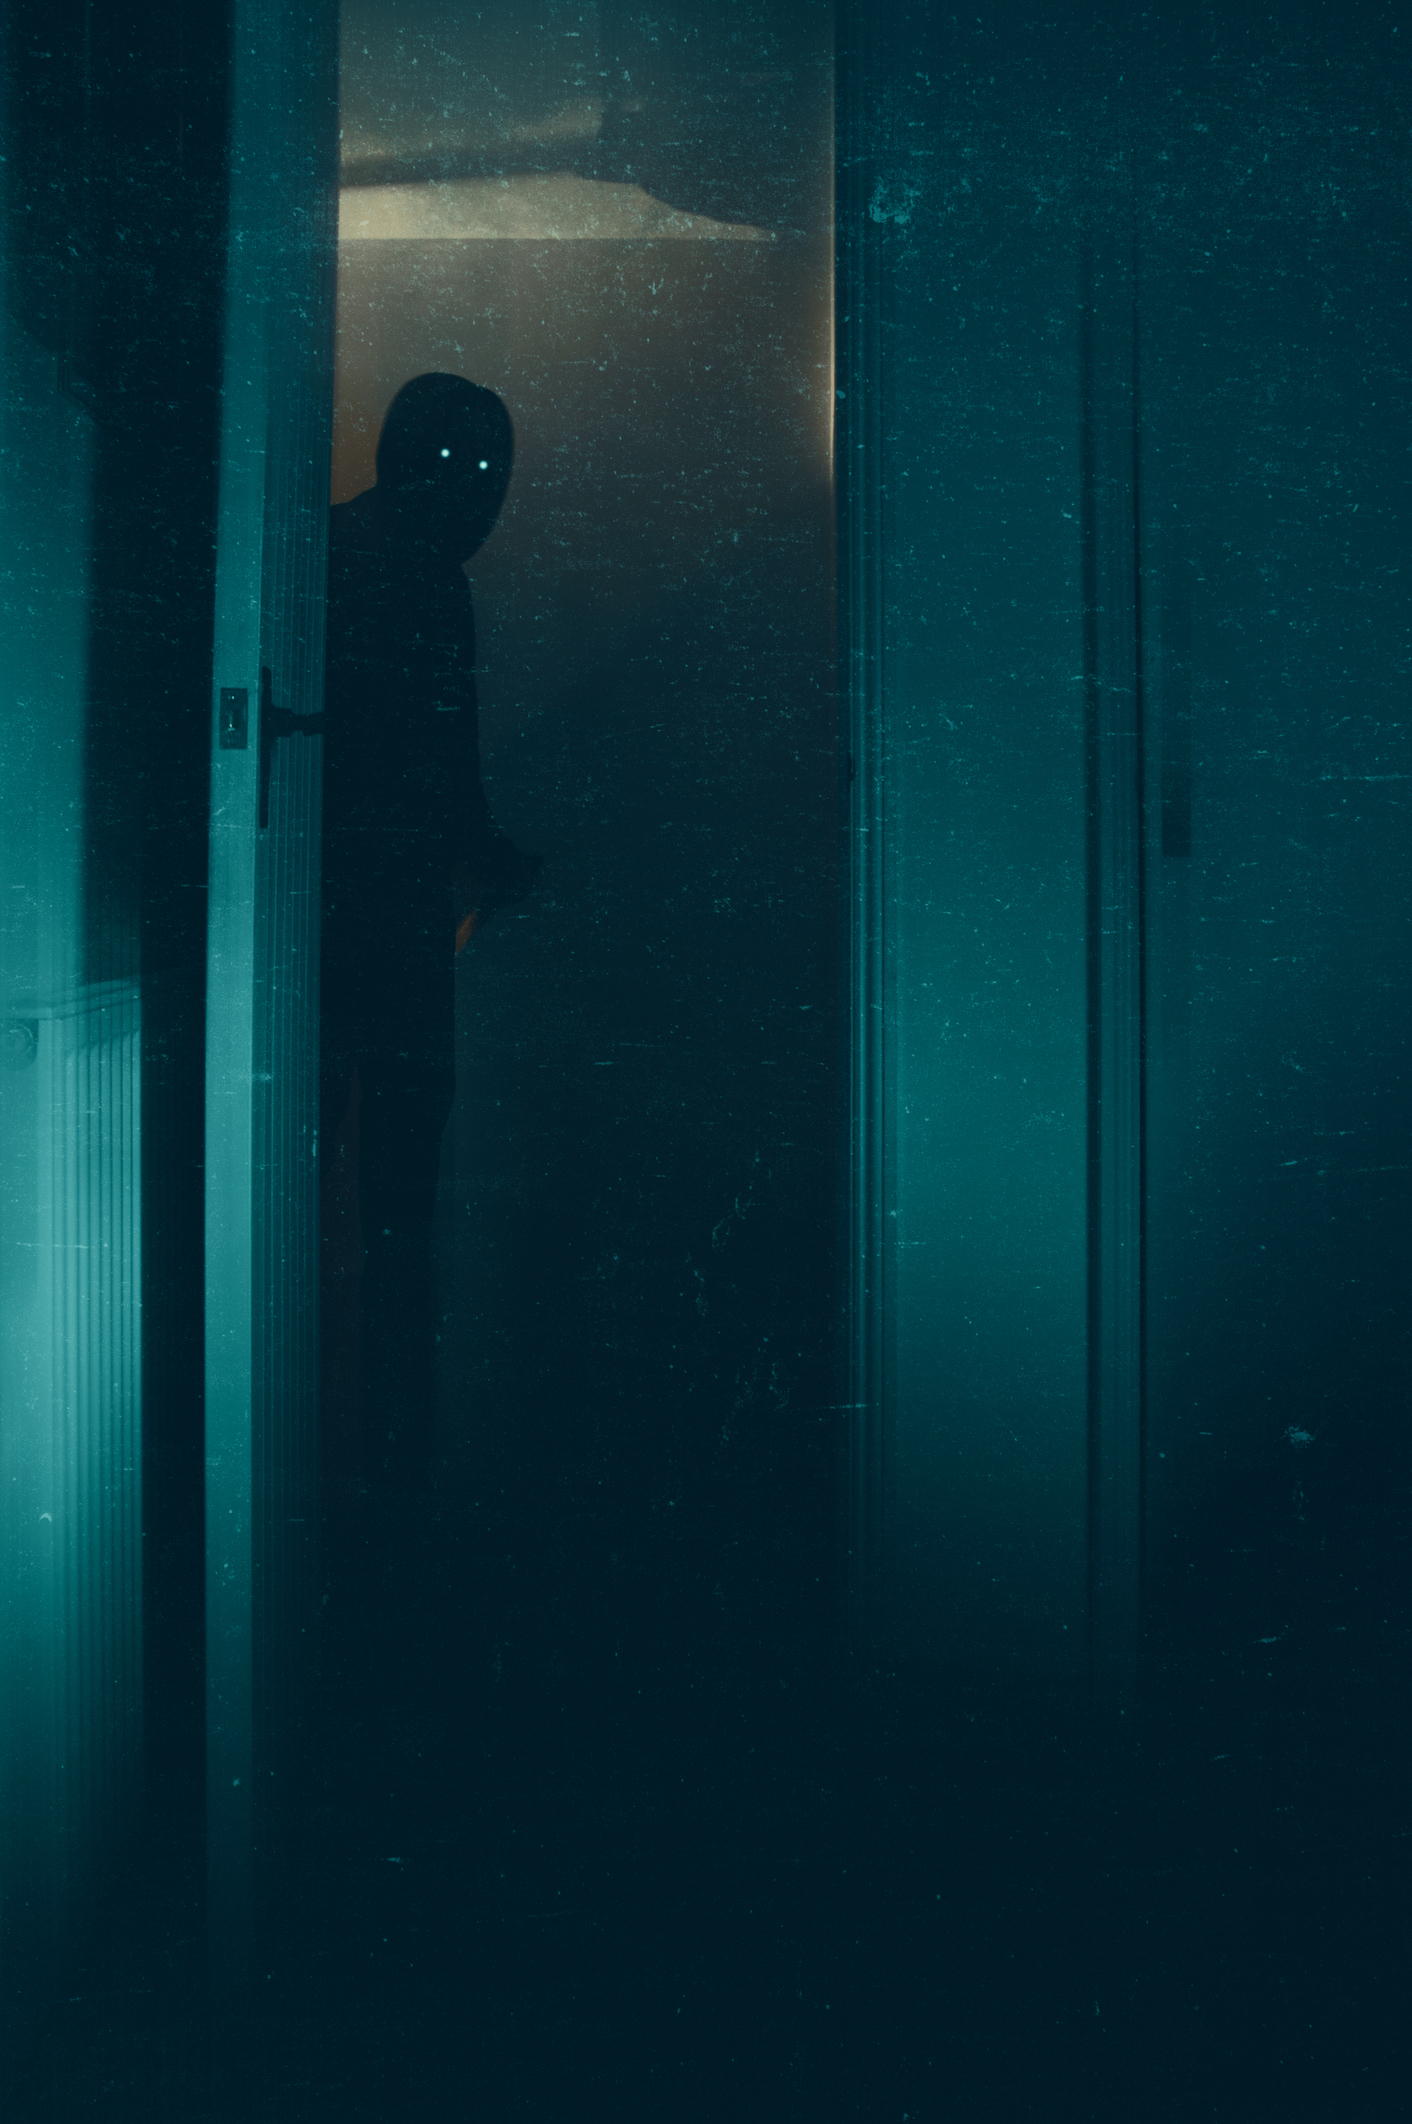 A silhouette with glowing eyes in a doorway